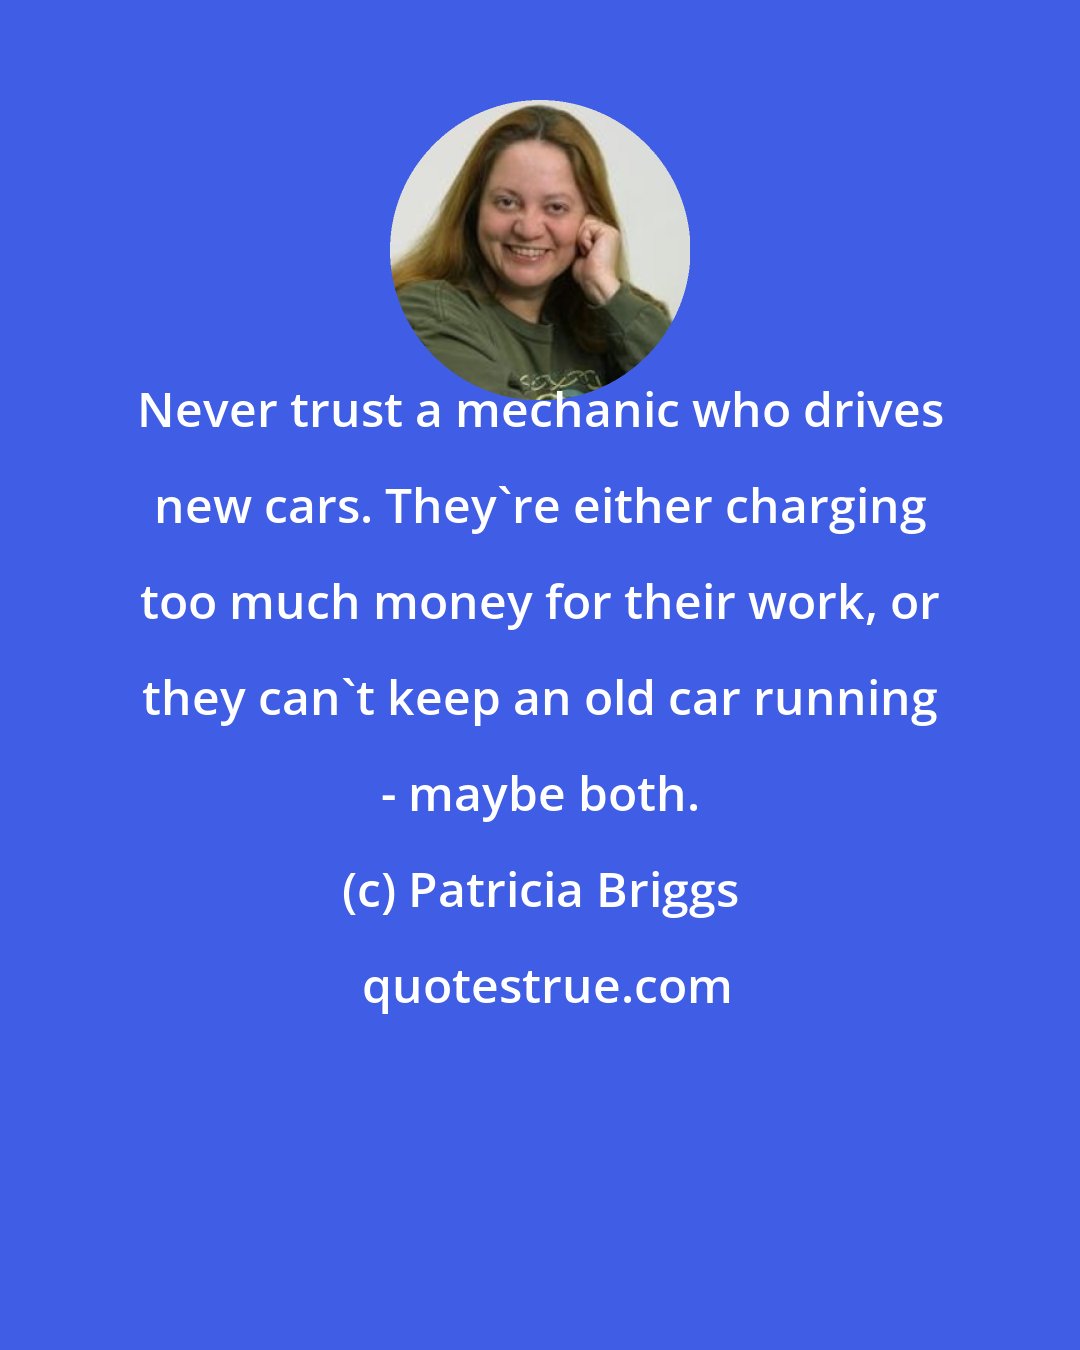 Patricia Briggs: Never trust a mechanic who drives new cars. They're either charging too much money for their work, or they can't keep an old car running - maybe both.